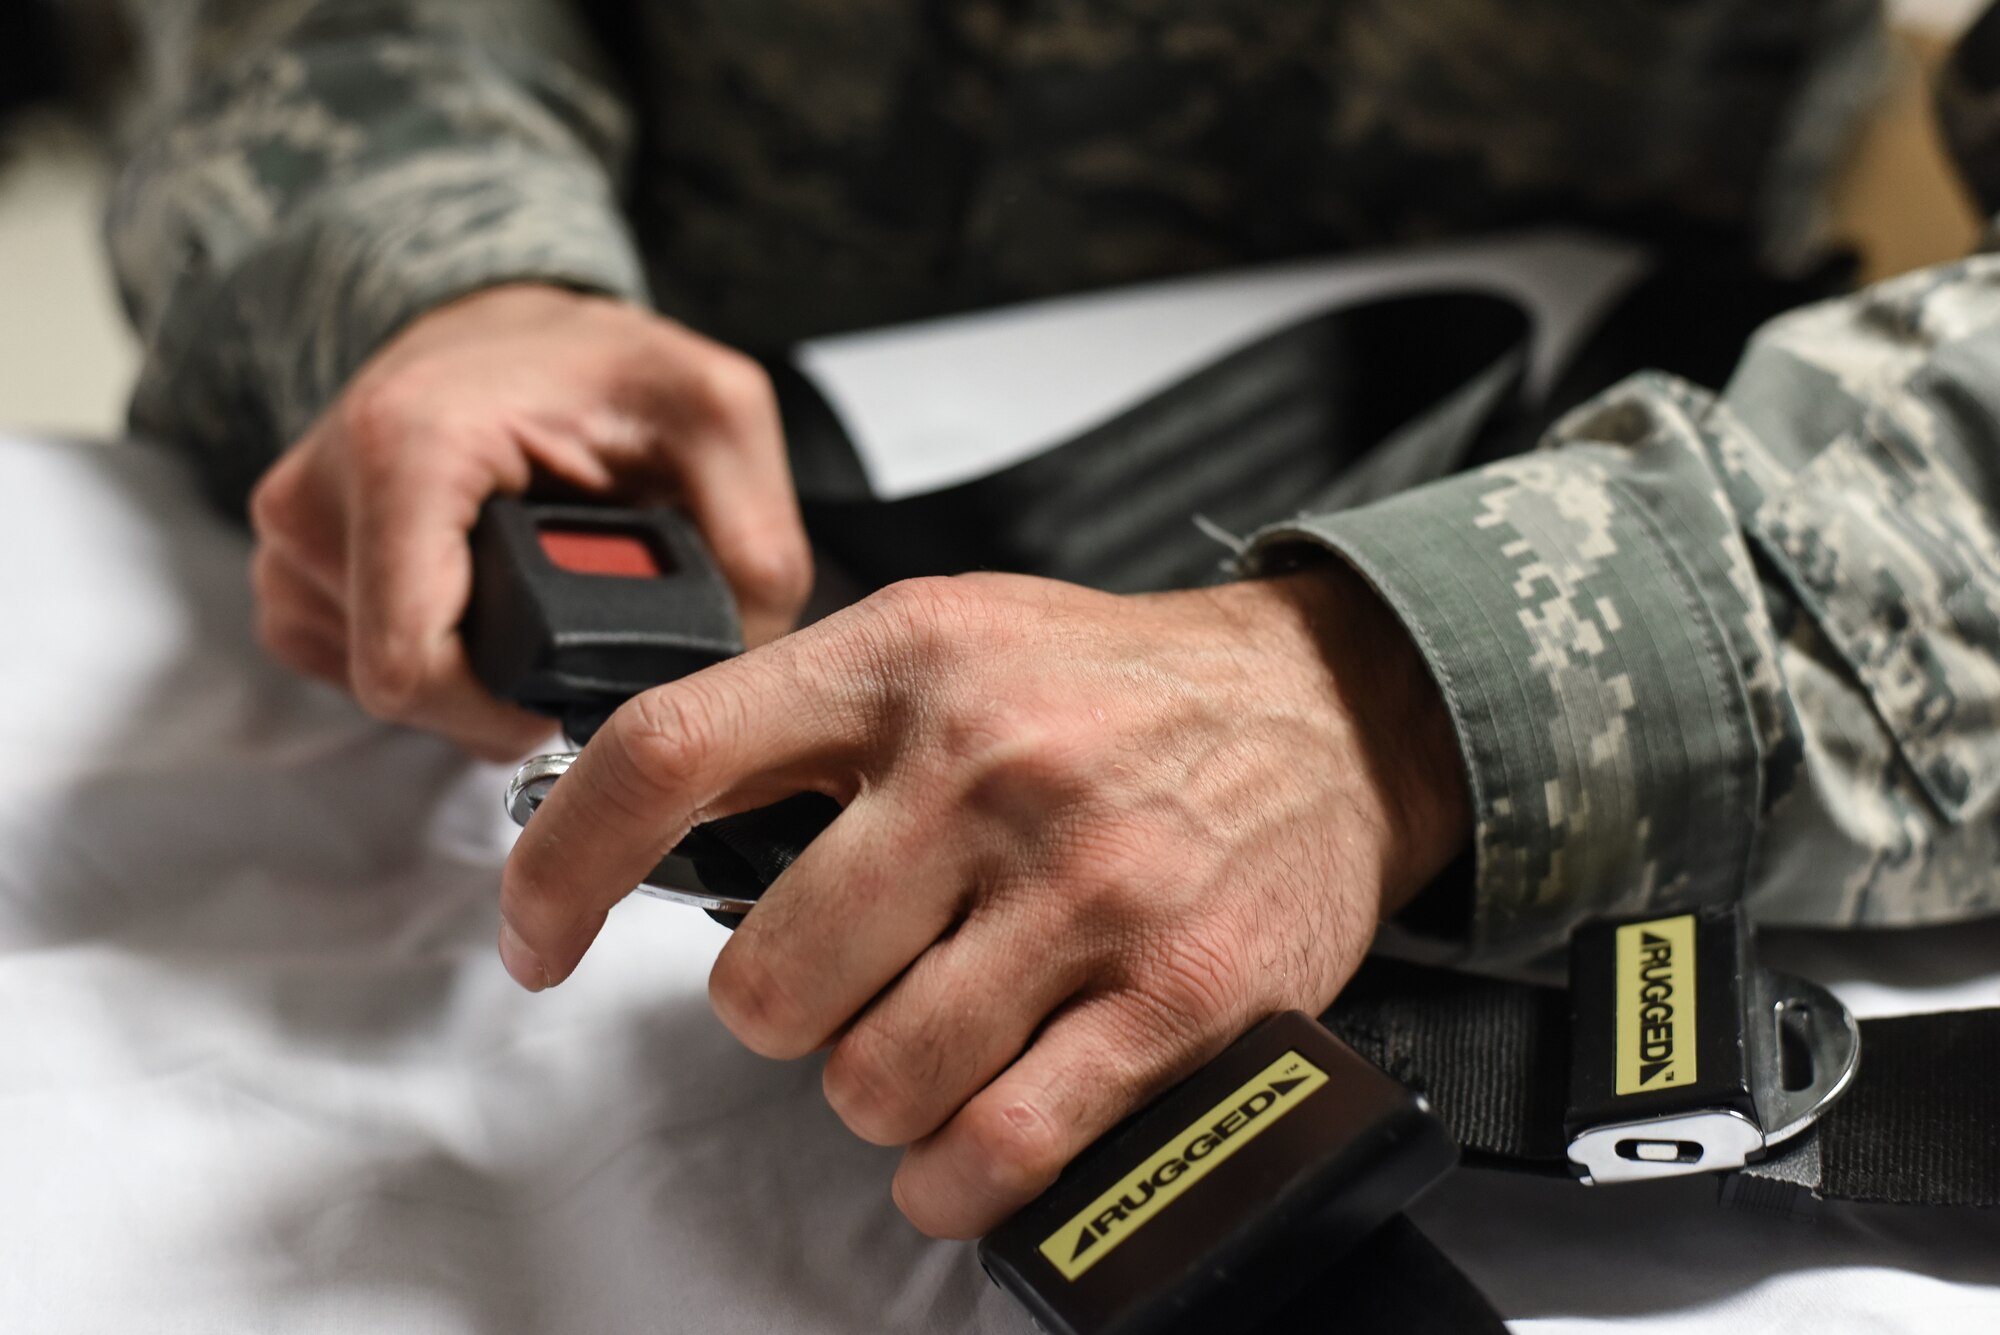 A U.S. Air Force Airman assigned to the 39th Medical Operations Squadron prepares medical equipment during a medical contingency readiness exercise at Incirlik Air Base, Turkey, Feb. 16, 2018. During the exercise, the 39 MDG tested their ability to operate, evaluate and treat patients in an alternate facility, in case a real-world scenario such as a chemical or nuclear attack, were to occur. (U.S. Air Force photo by Senior Airman Kristan Campbell)